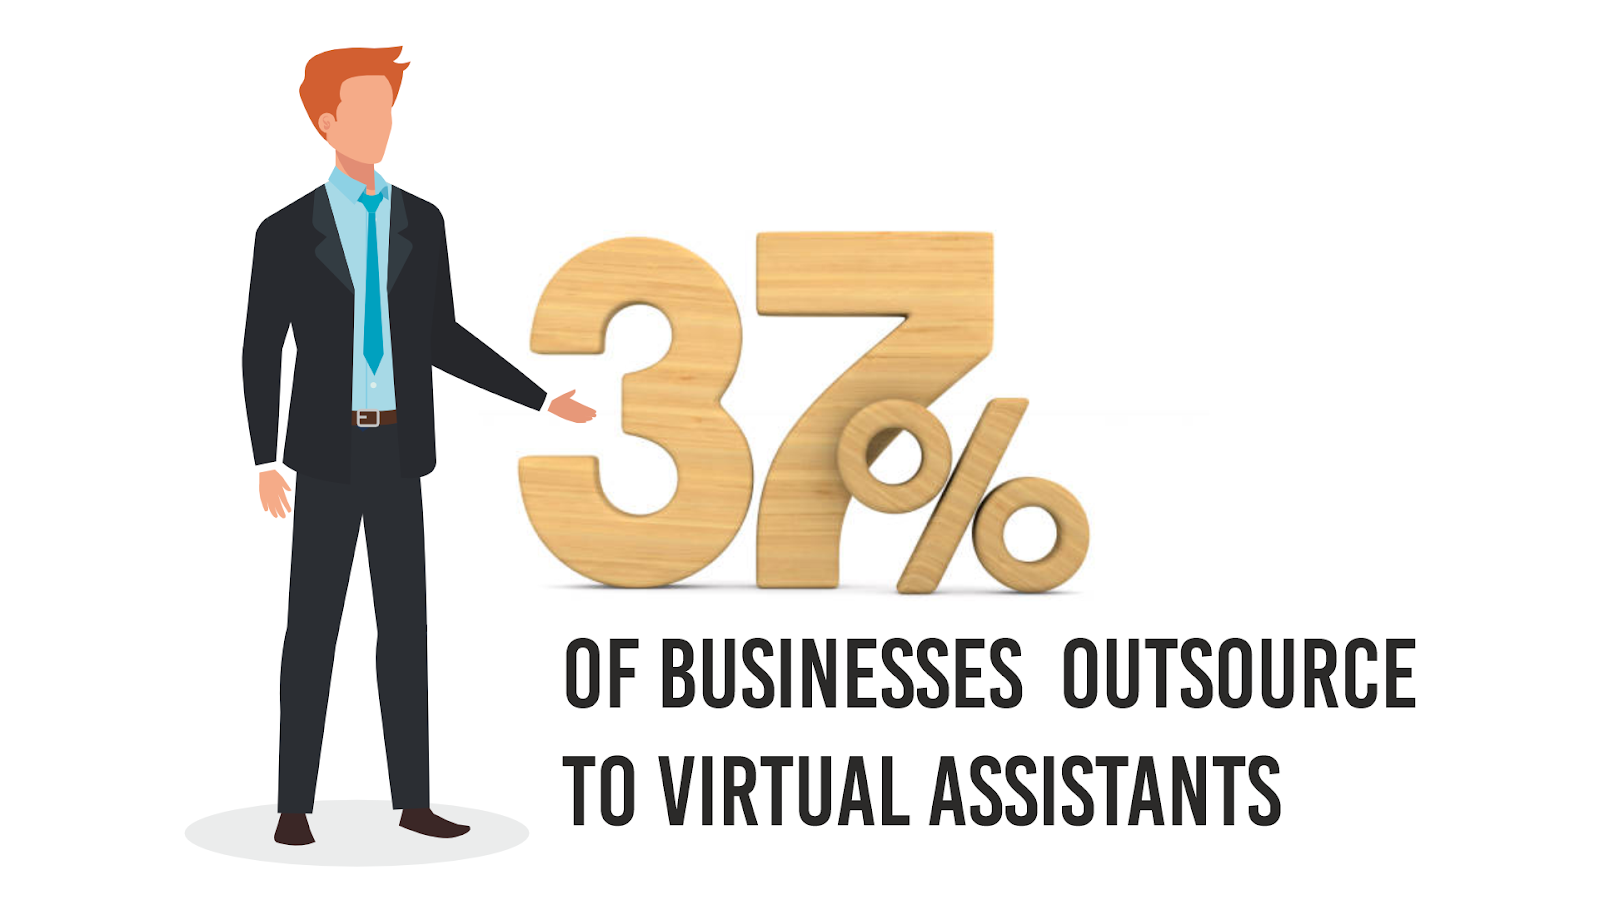 Infographic depicting that 37% of businesses outsource their tasks to a virtual assistant